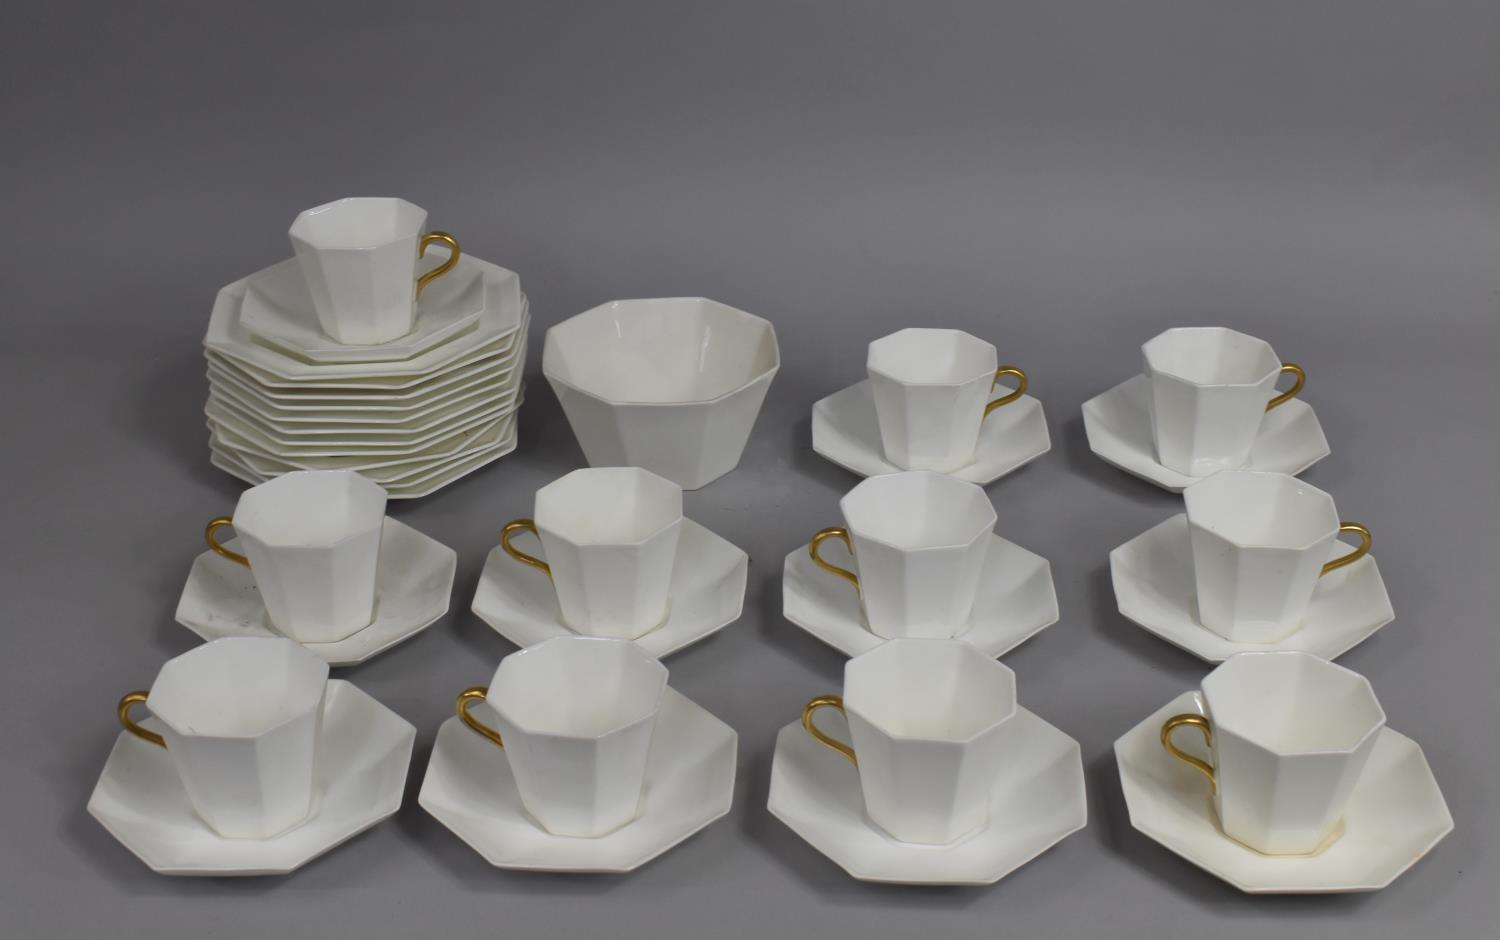 A Wedgwood Gilt and White Decorated Service to comprise Cups, Saucers, Side Pates, Bowls, Cake Plate